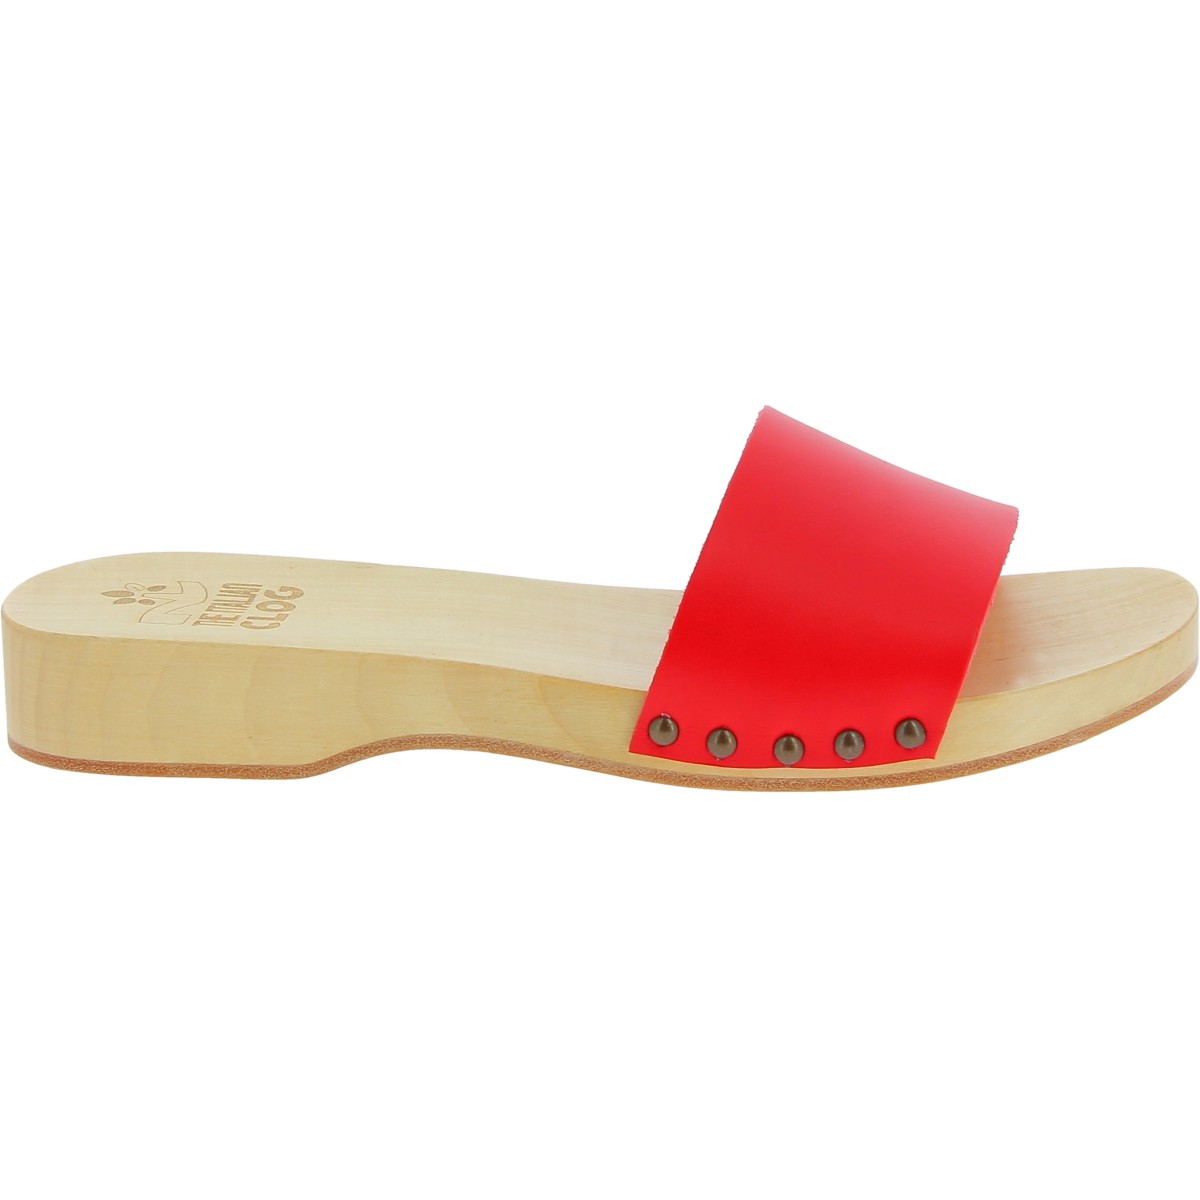 Handmade wooden clog slippers for men with red leather band | The ...